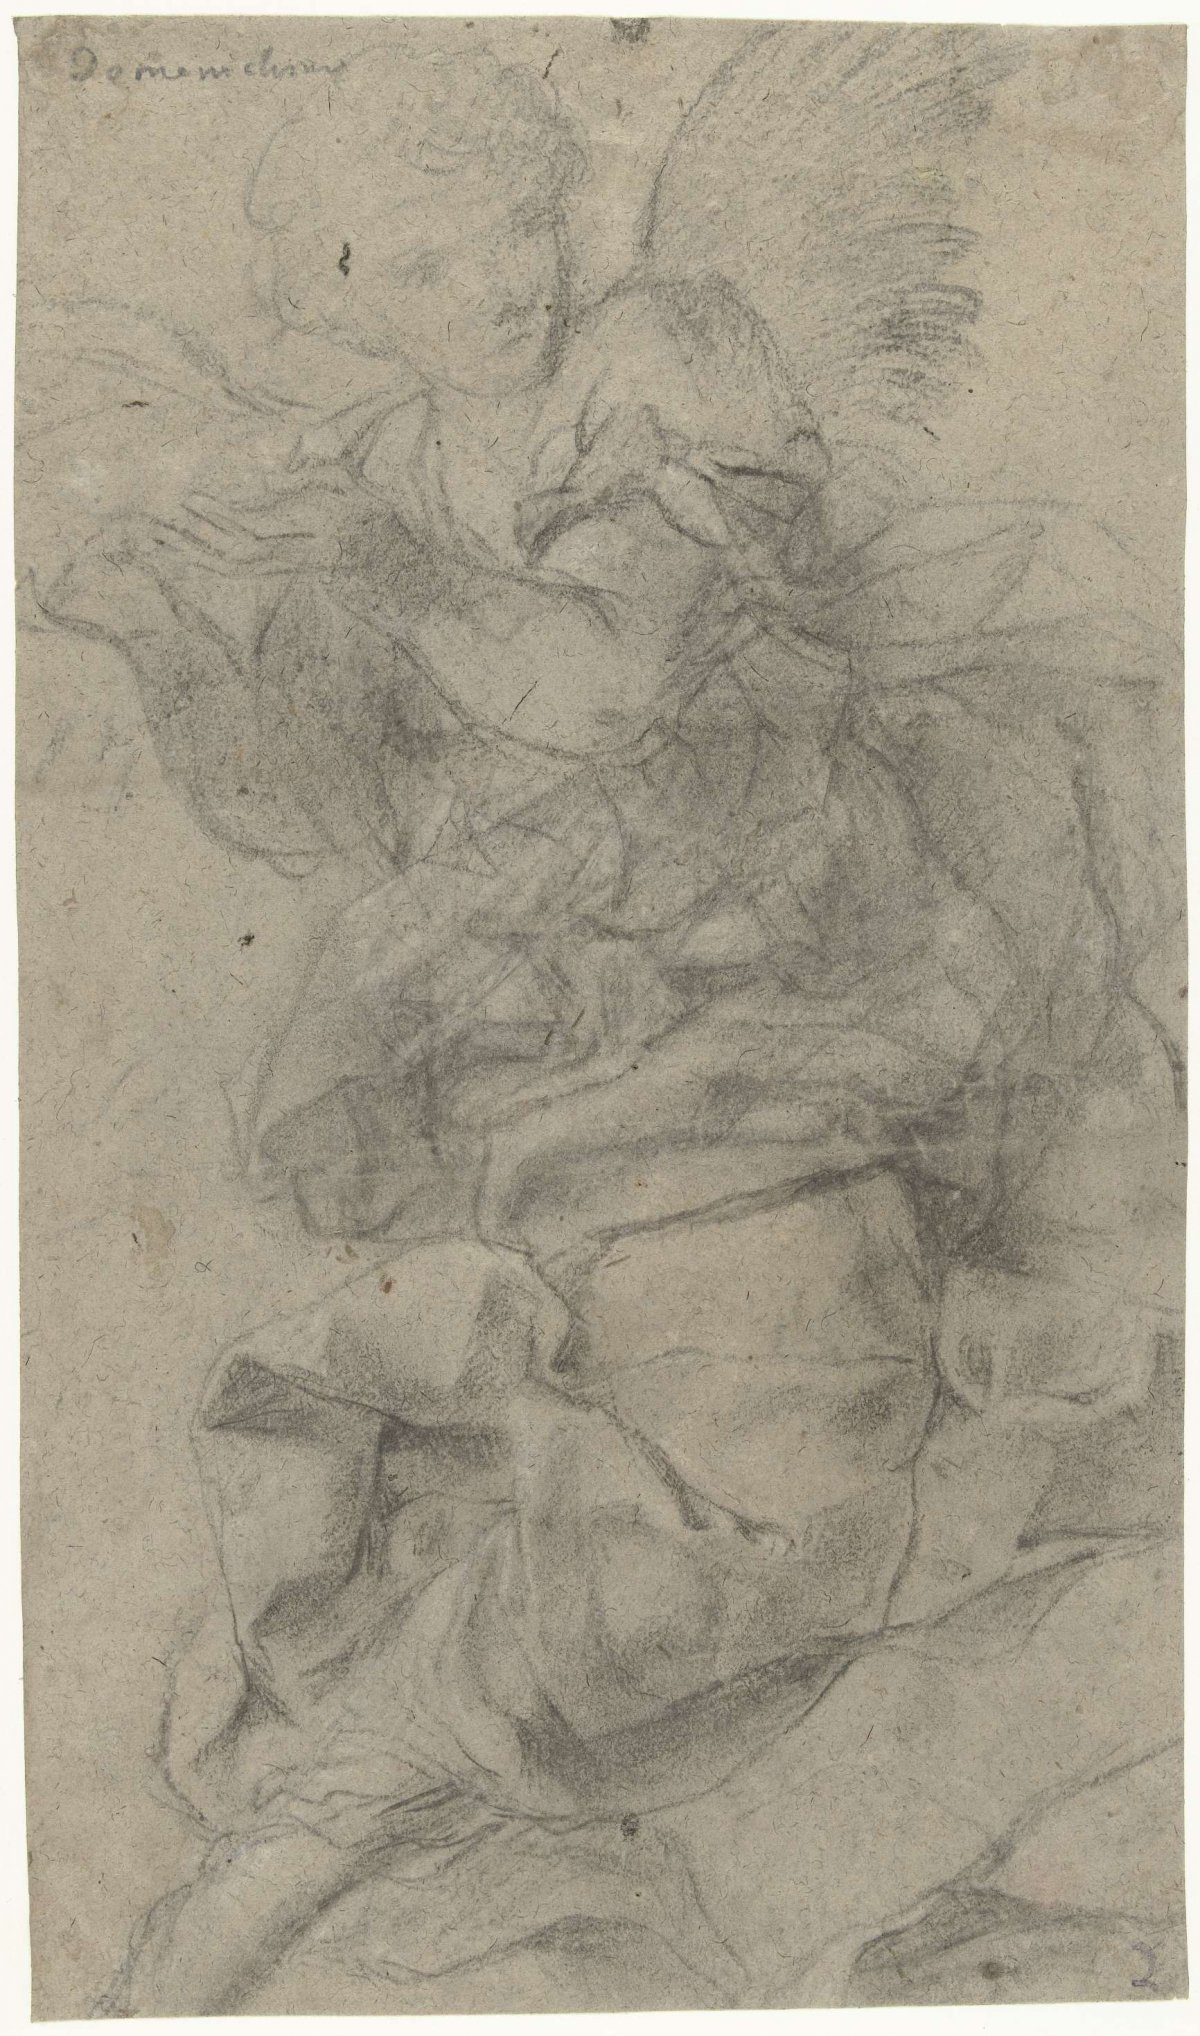 Study of a hovering angel, Domenichino, 1613 - 1623